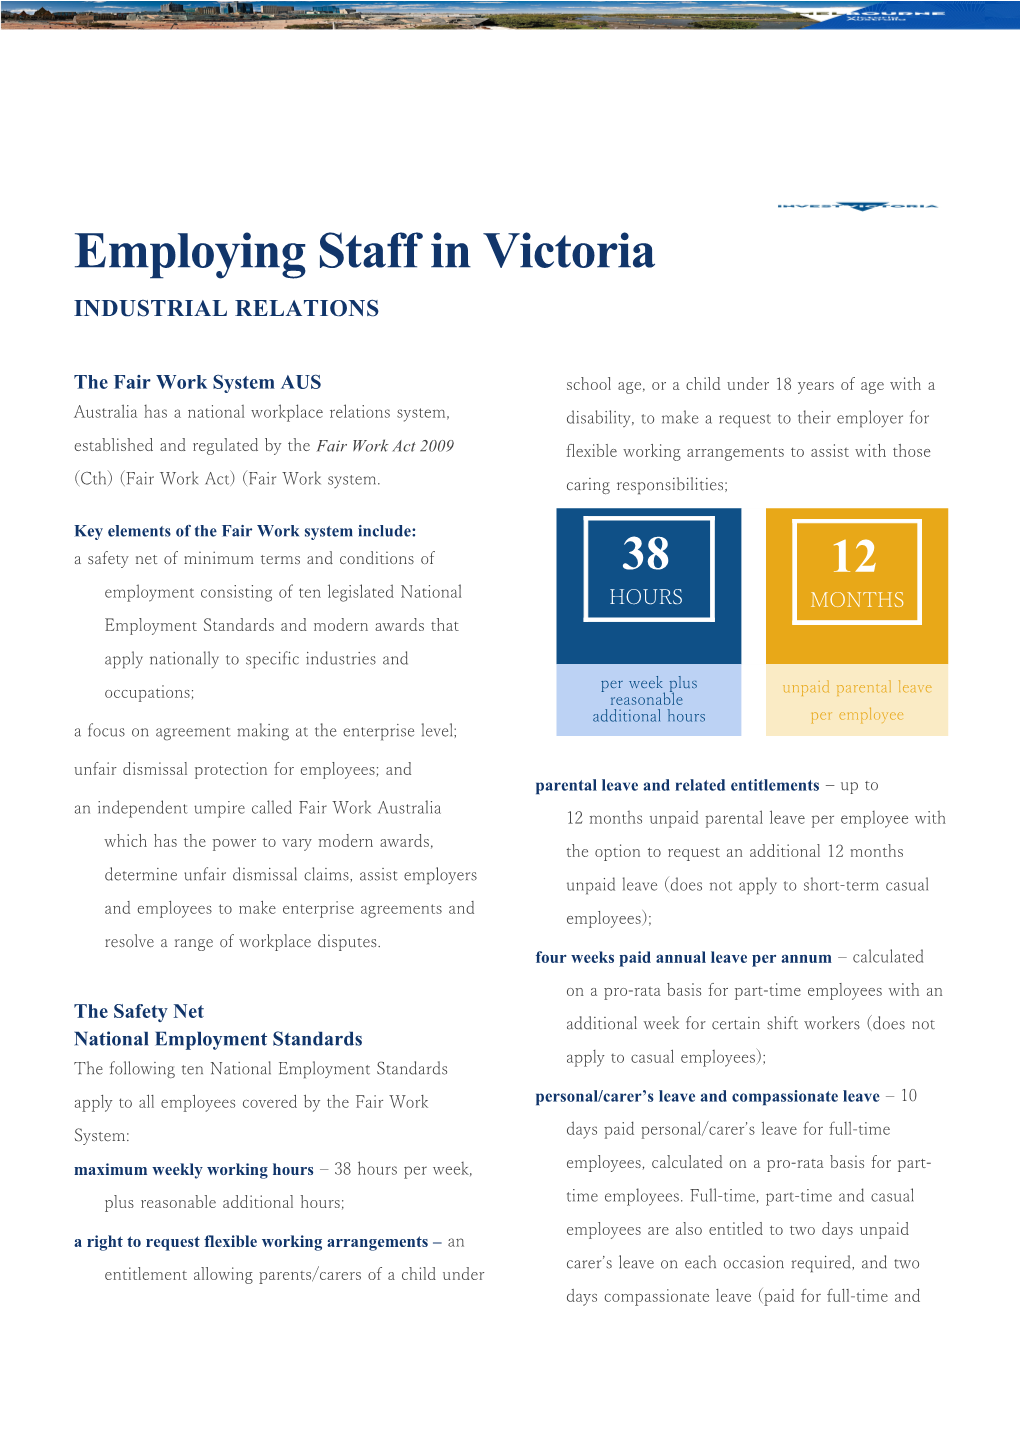 Employing Staff in Victoria